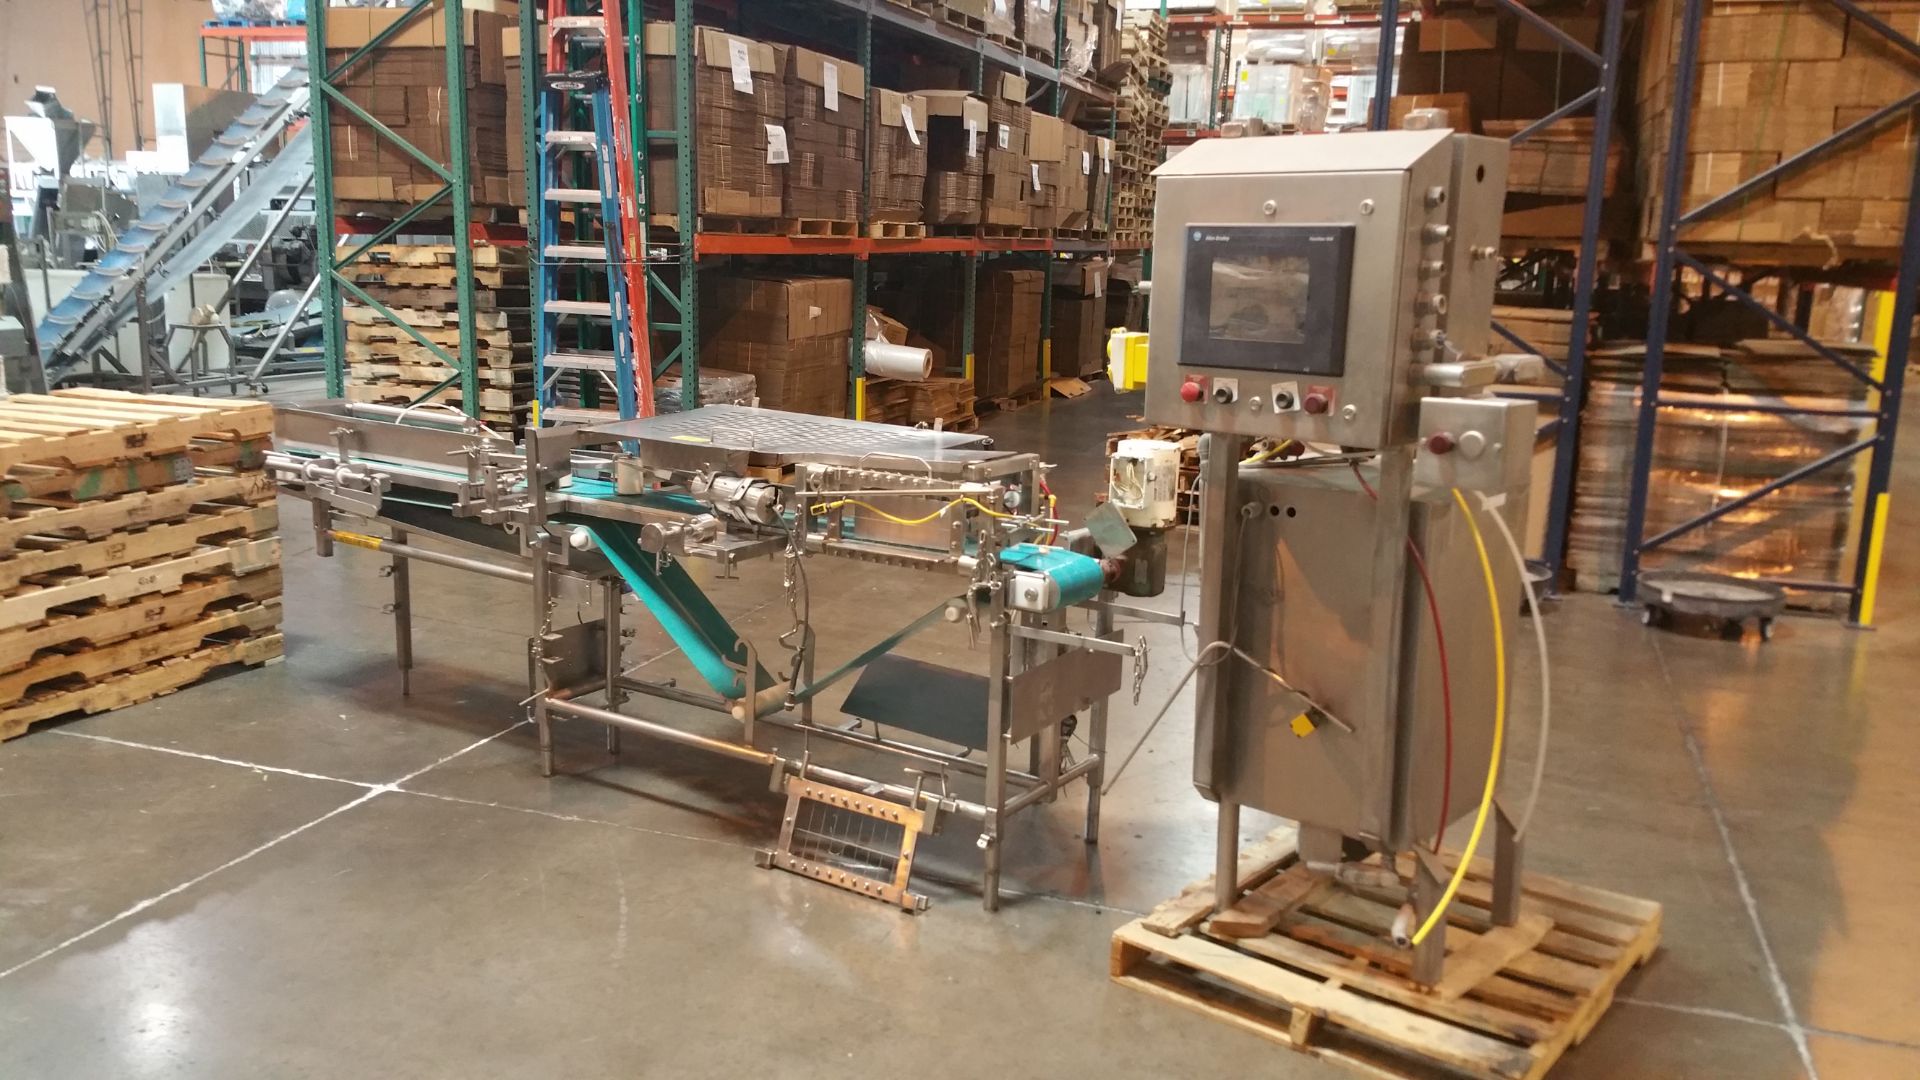 Koss Ultrasonic Feta Cheese Cutter, S/N: 55052, with (2) Heads, (3) S/S Harps, Conveyor, and